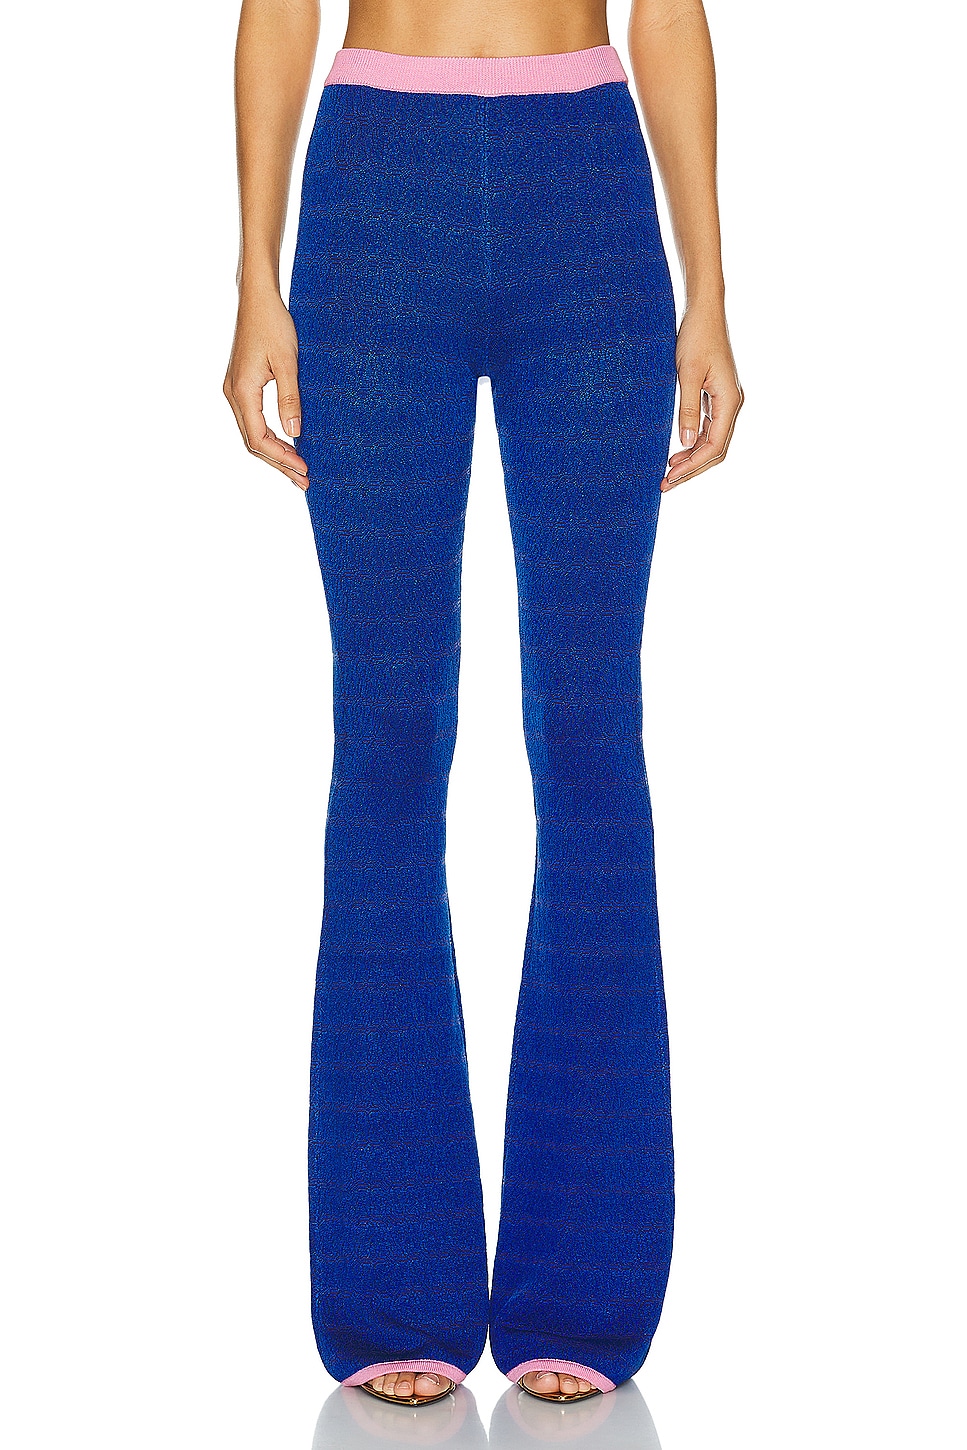 Image 1 of Bally Long Pant in Marine